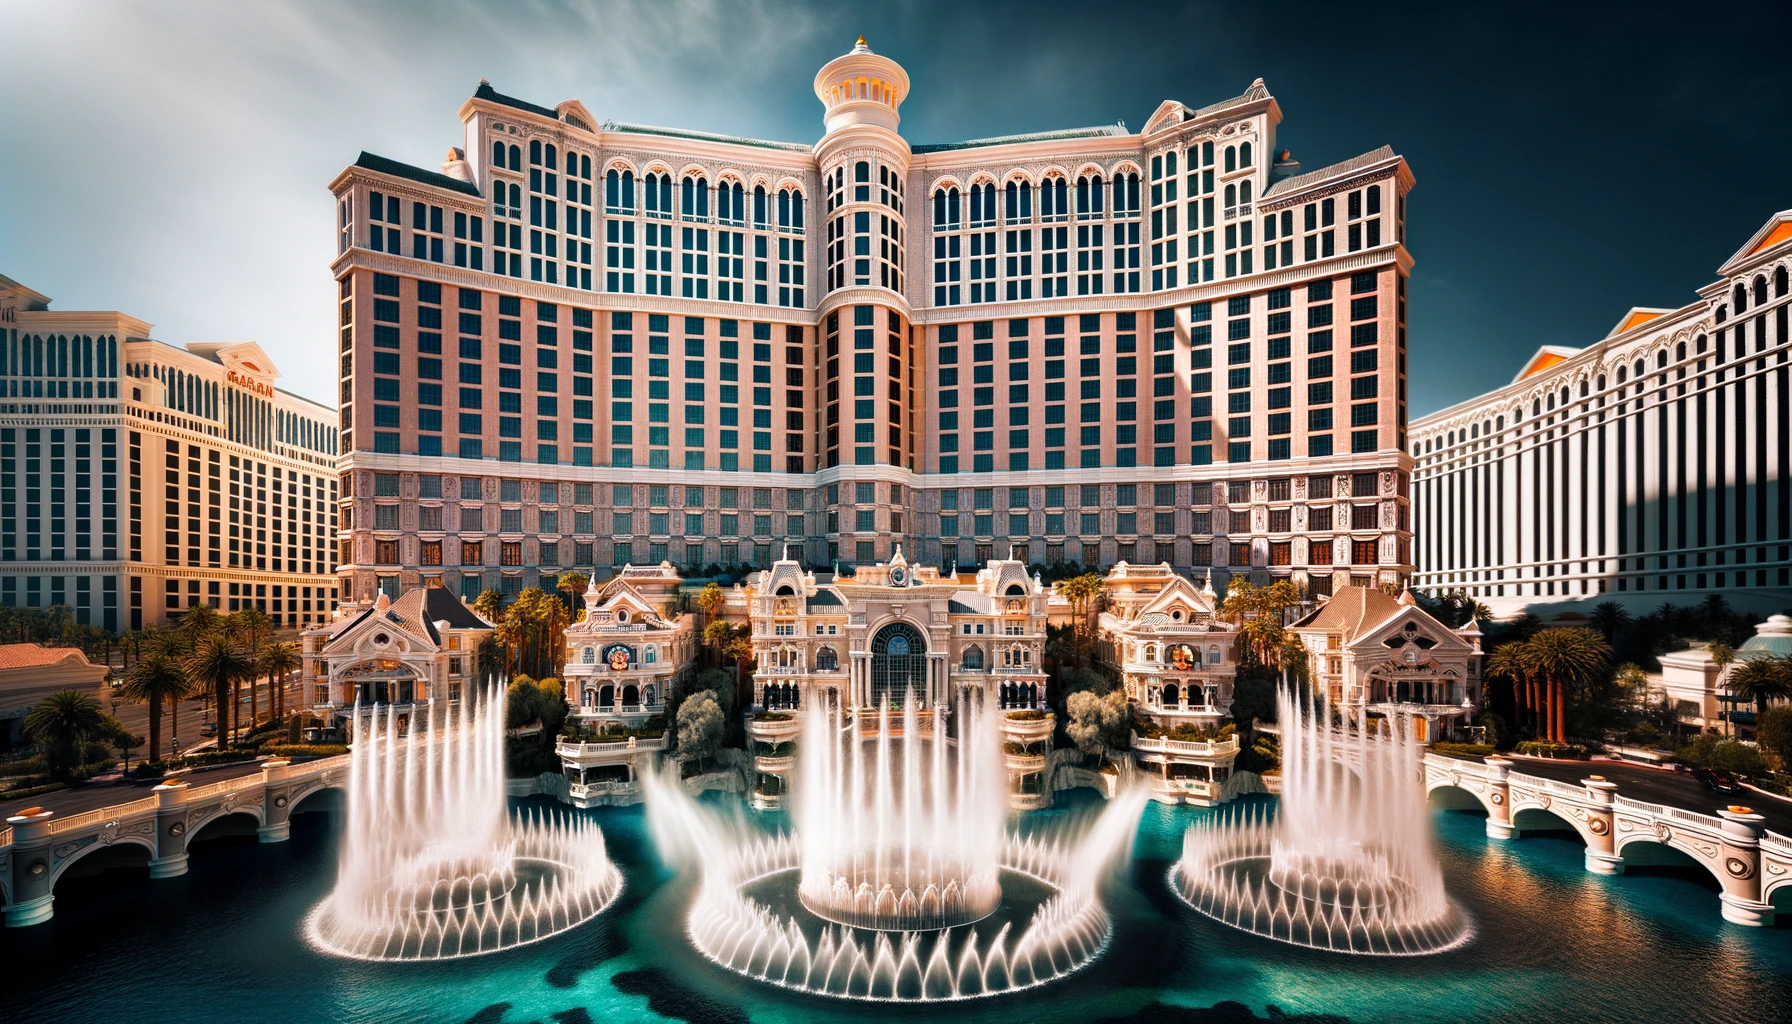 A grand hotel reminiscent of iconic Las Vegas architectures, highlighted by a magnificent water foun